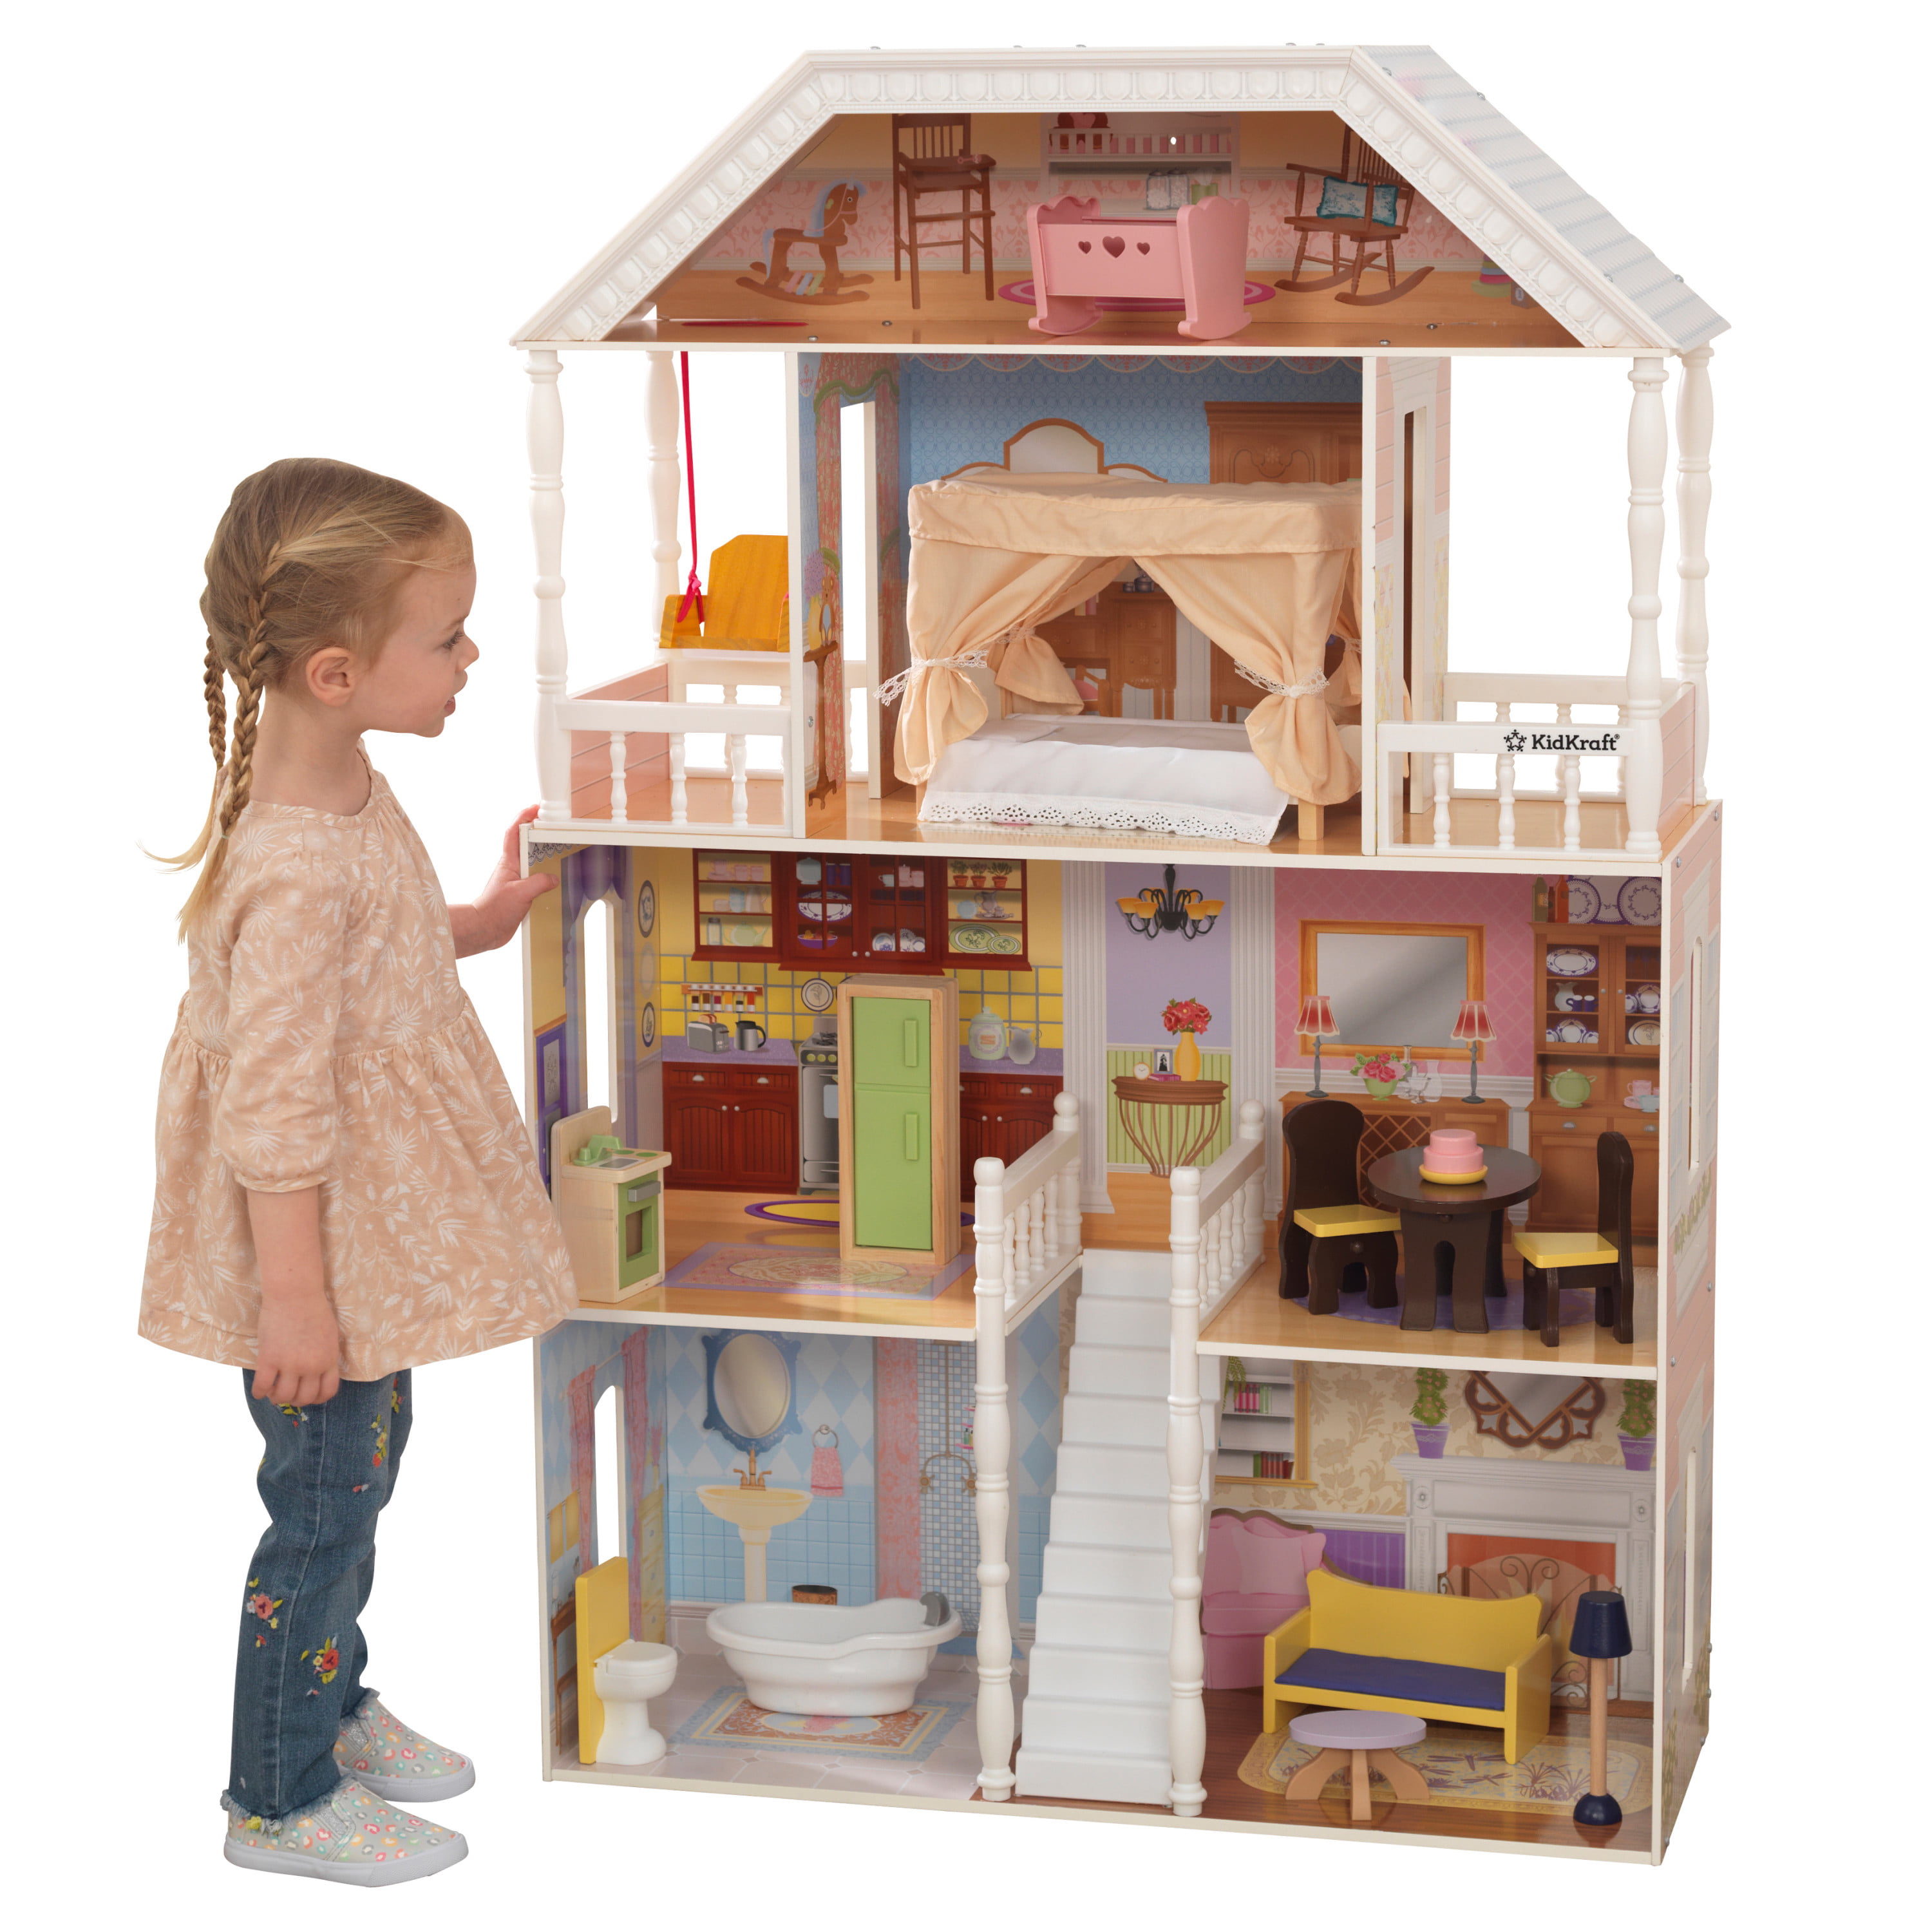 DOLLS HOUSE = Handcrafted  Metal Clever 